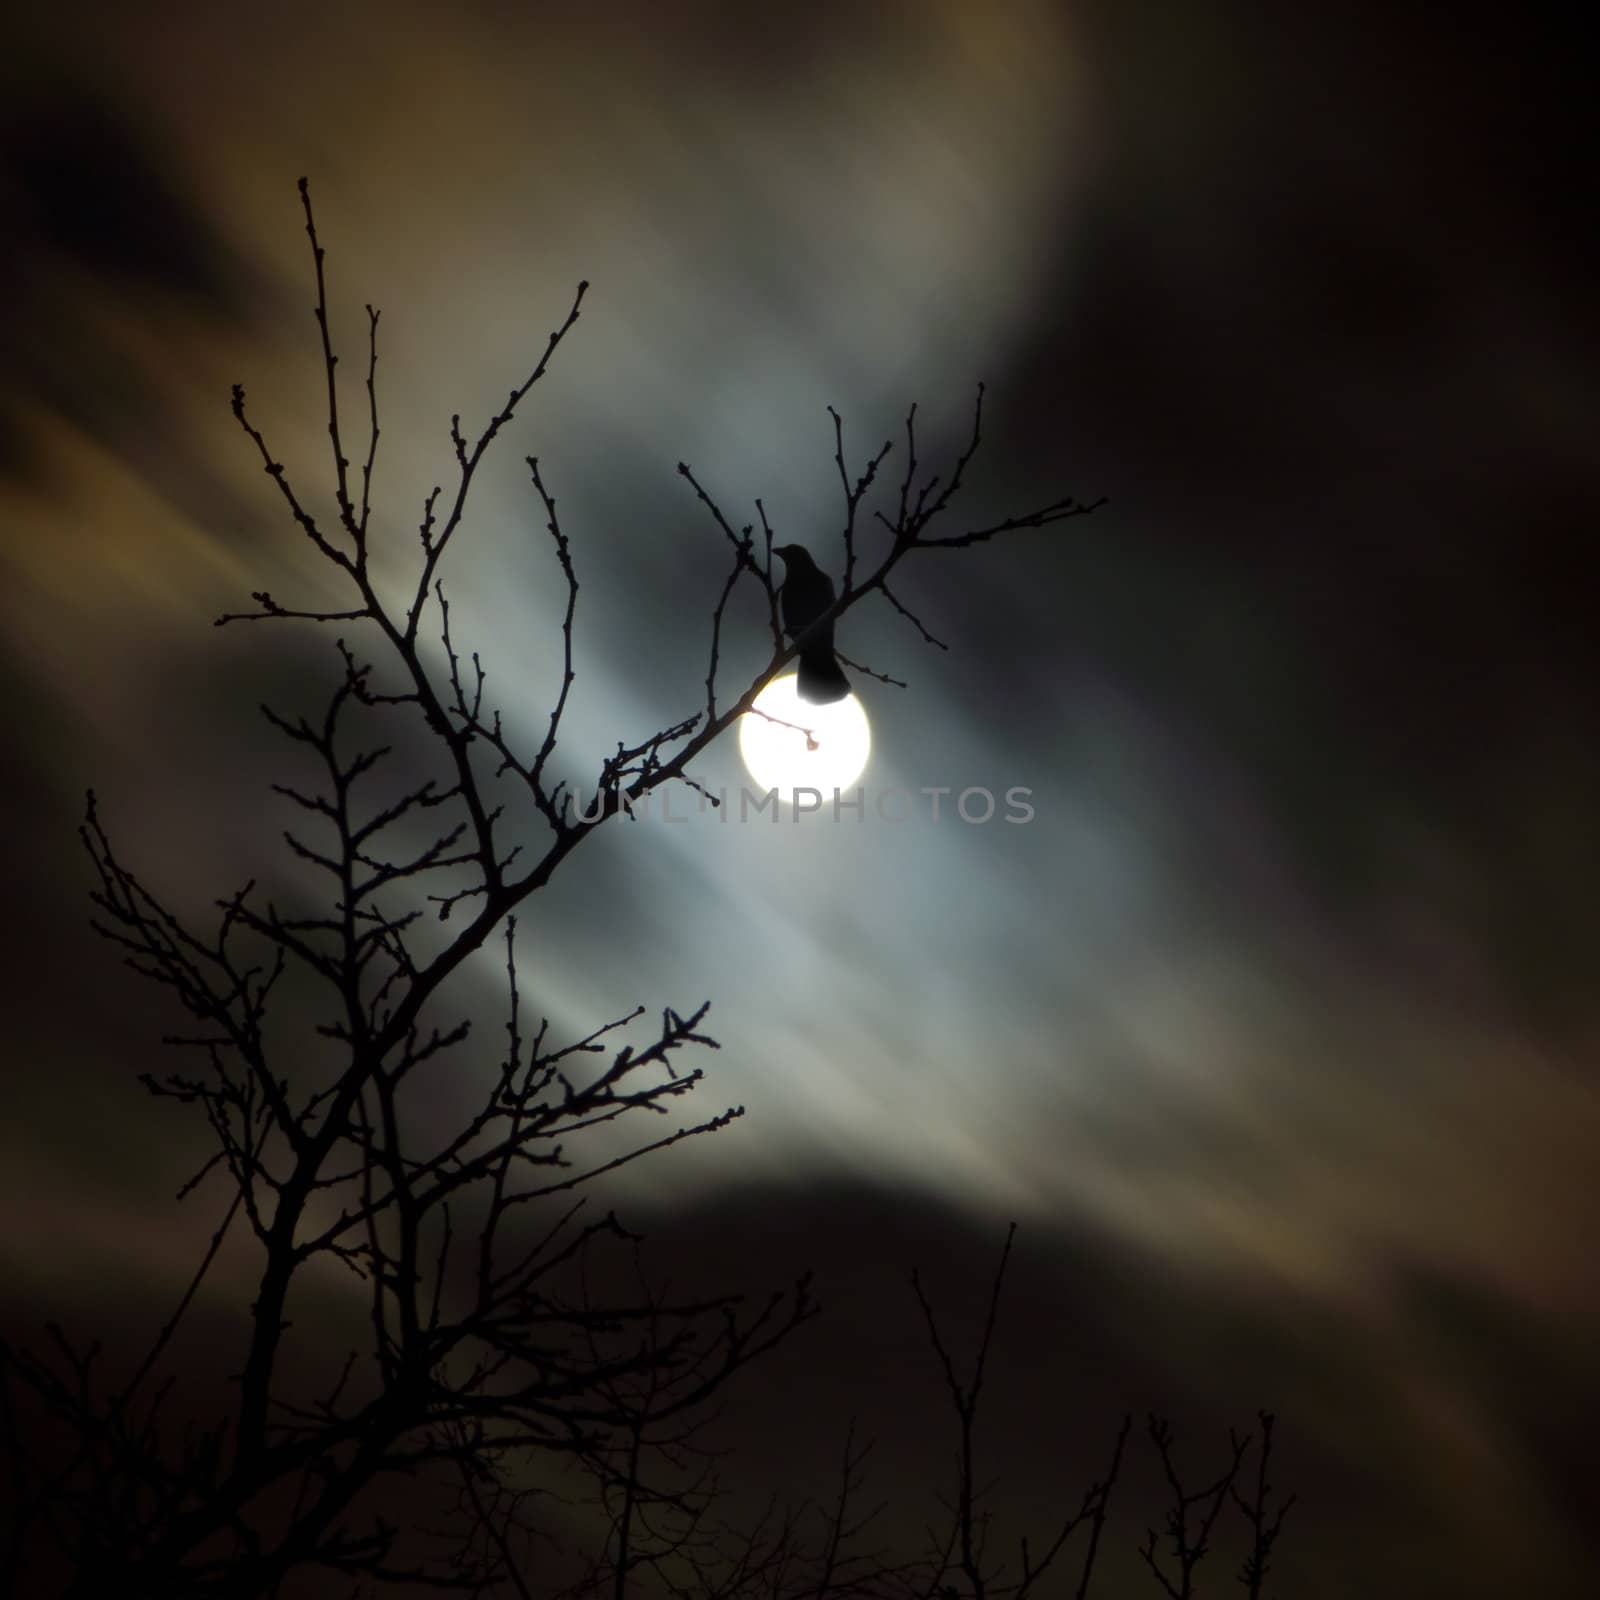 Raven siting on the branch and fullmoon night